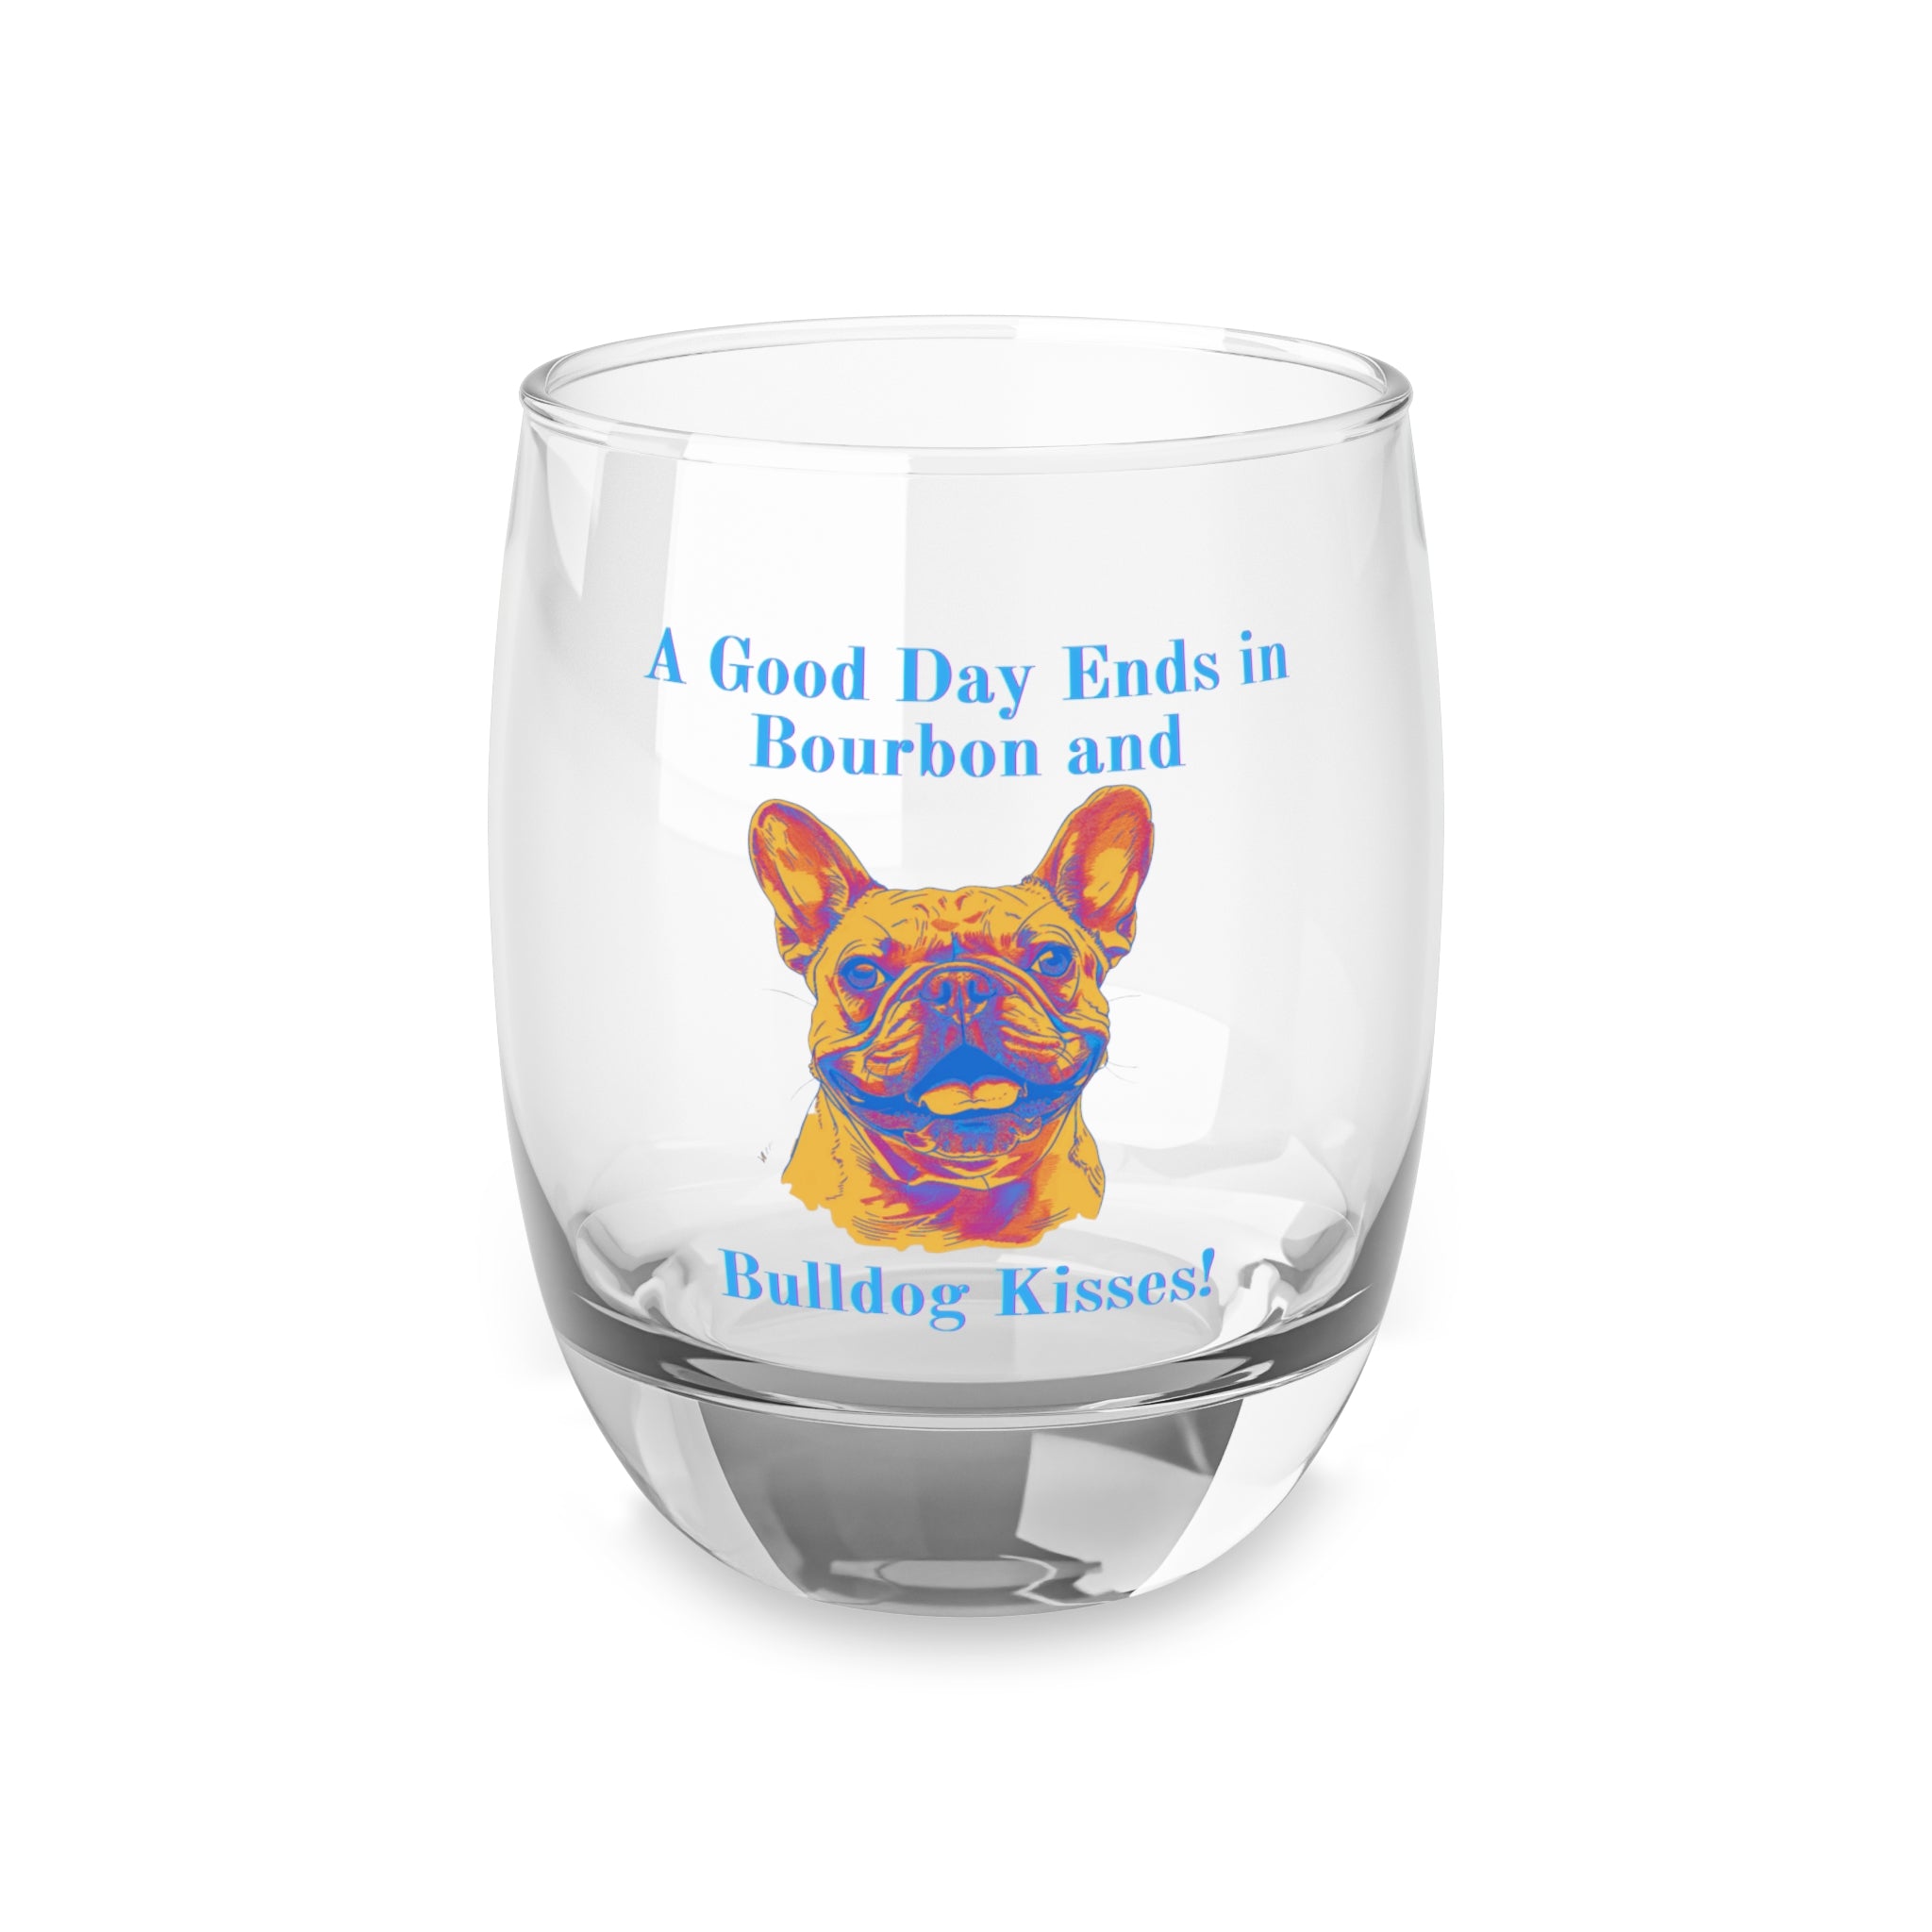 Tipsy Bully Good Day Ends in Bourbon and Bulldog Kisses!: Whiskey/Bourbon Glass (French)